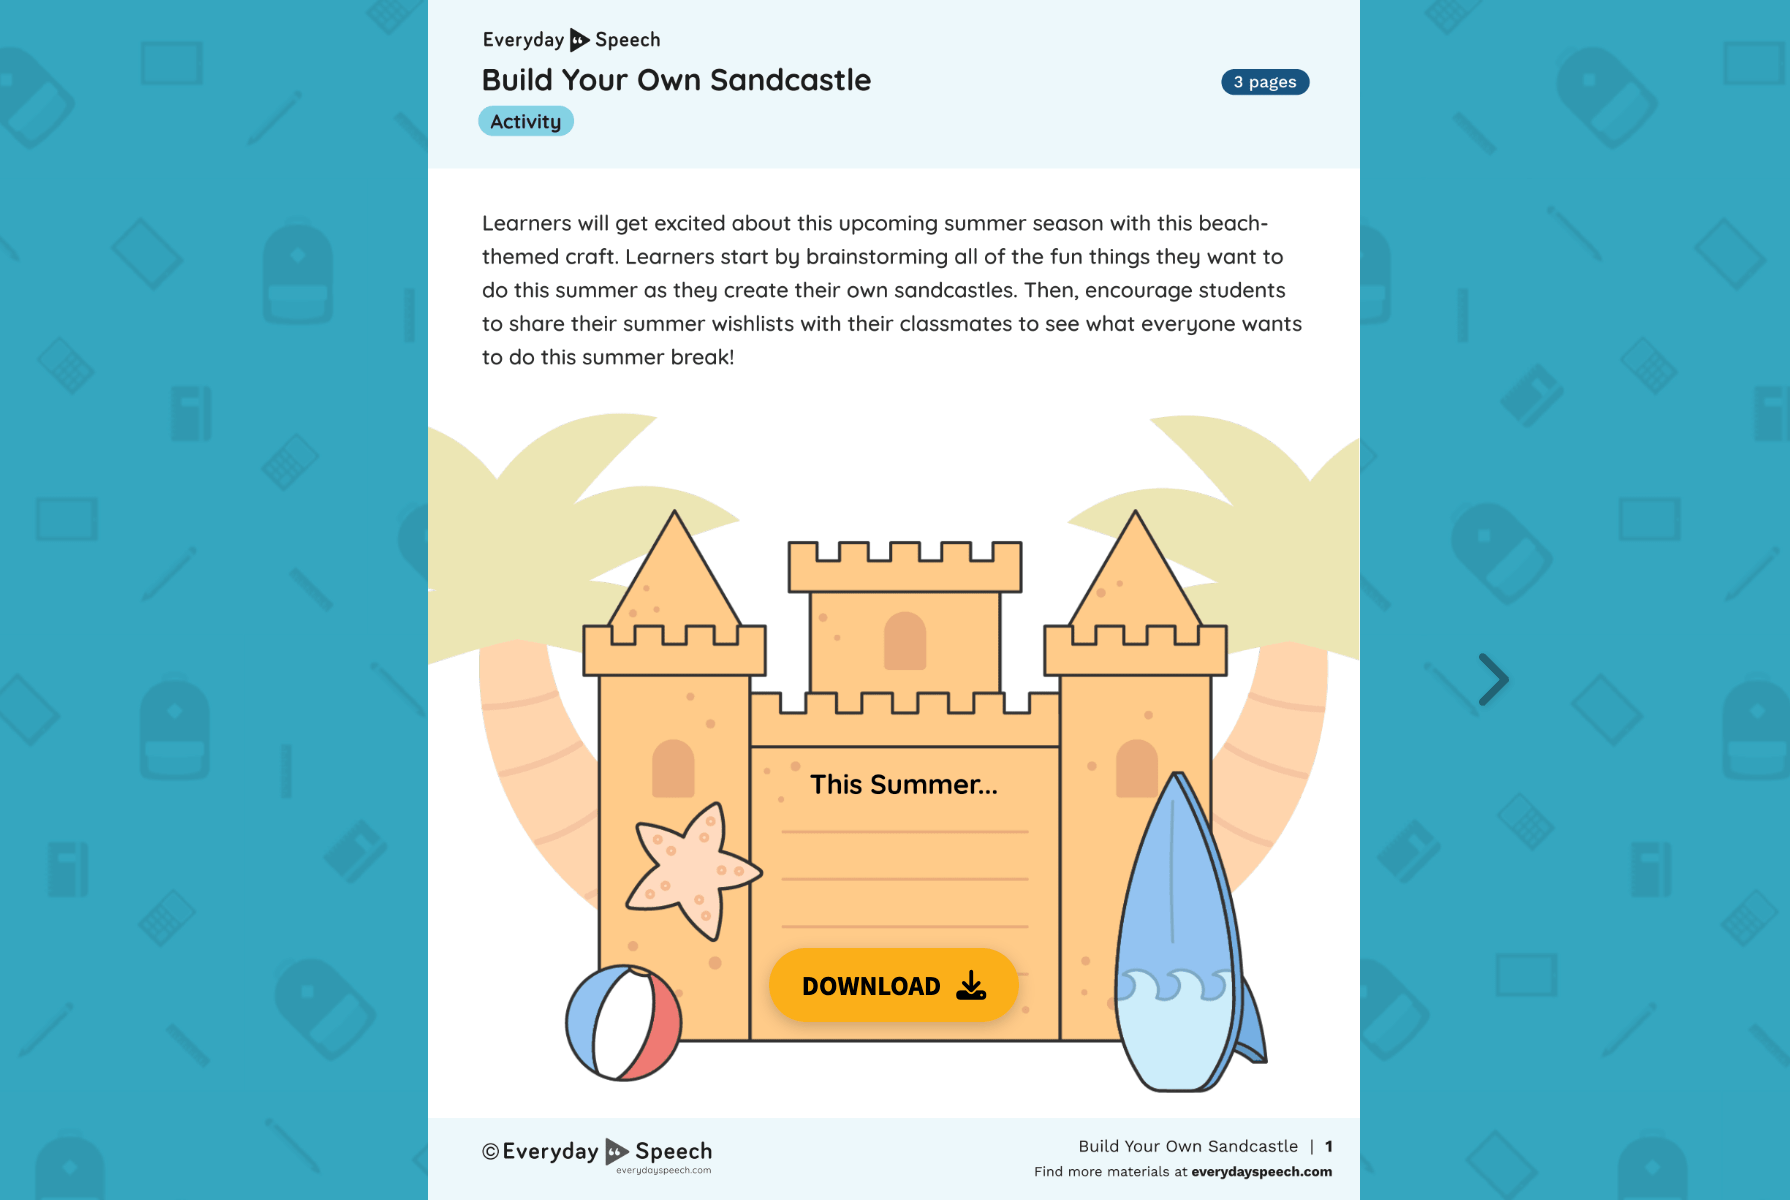 Summer Activity Build Your Own Sandcastle by Everyday Speech